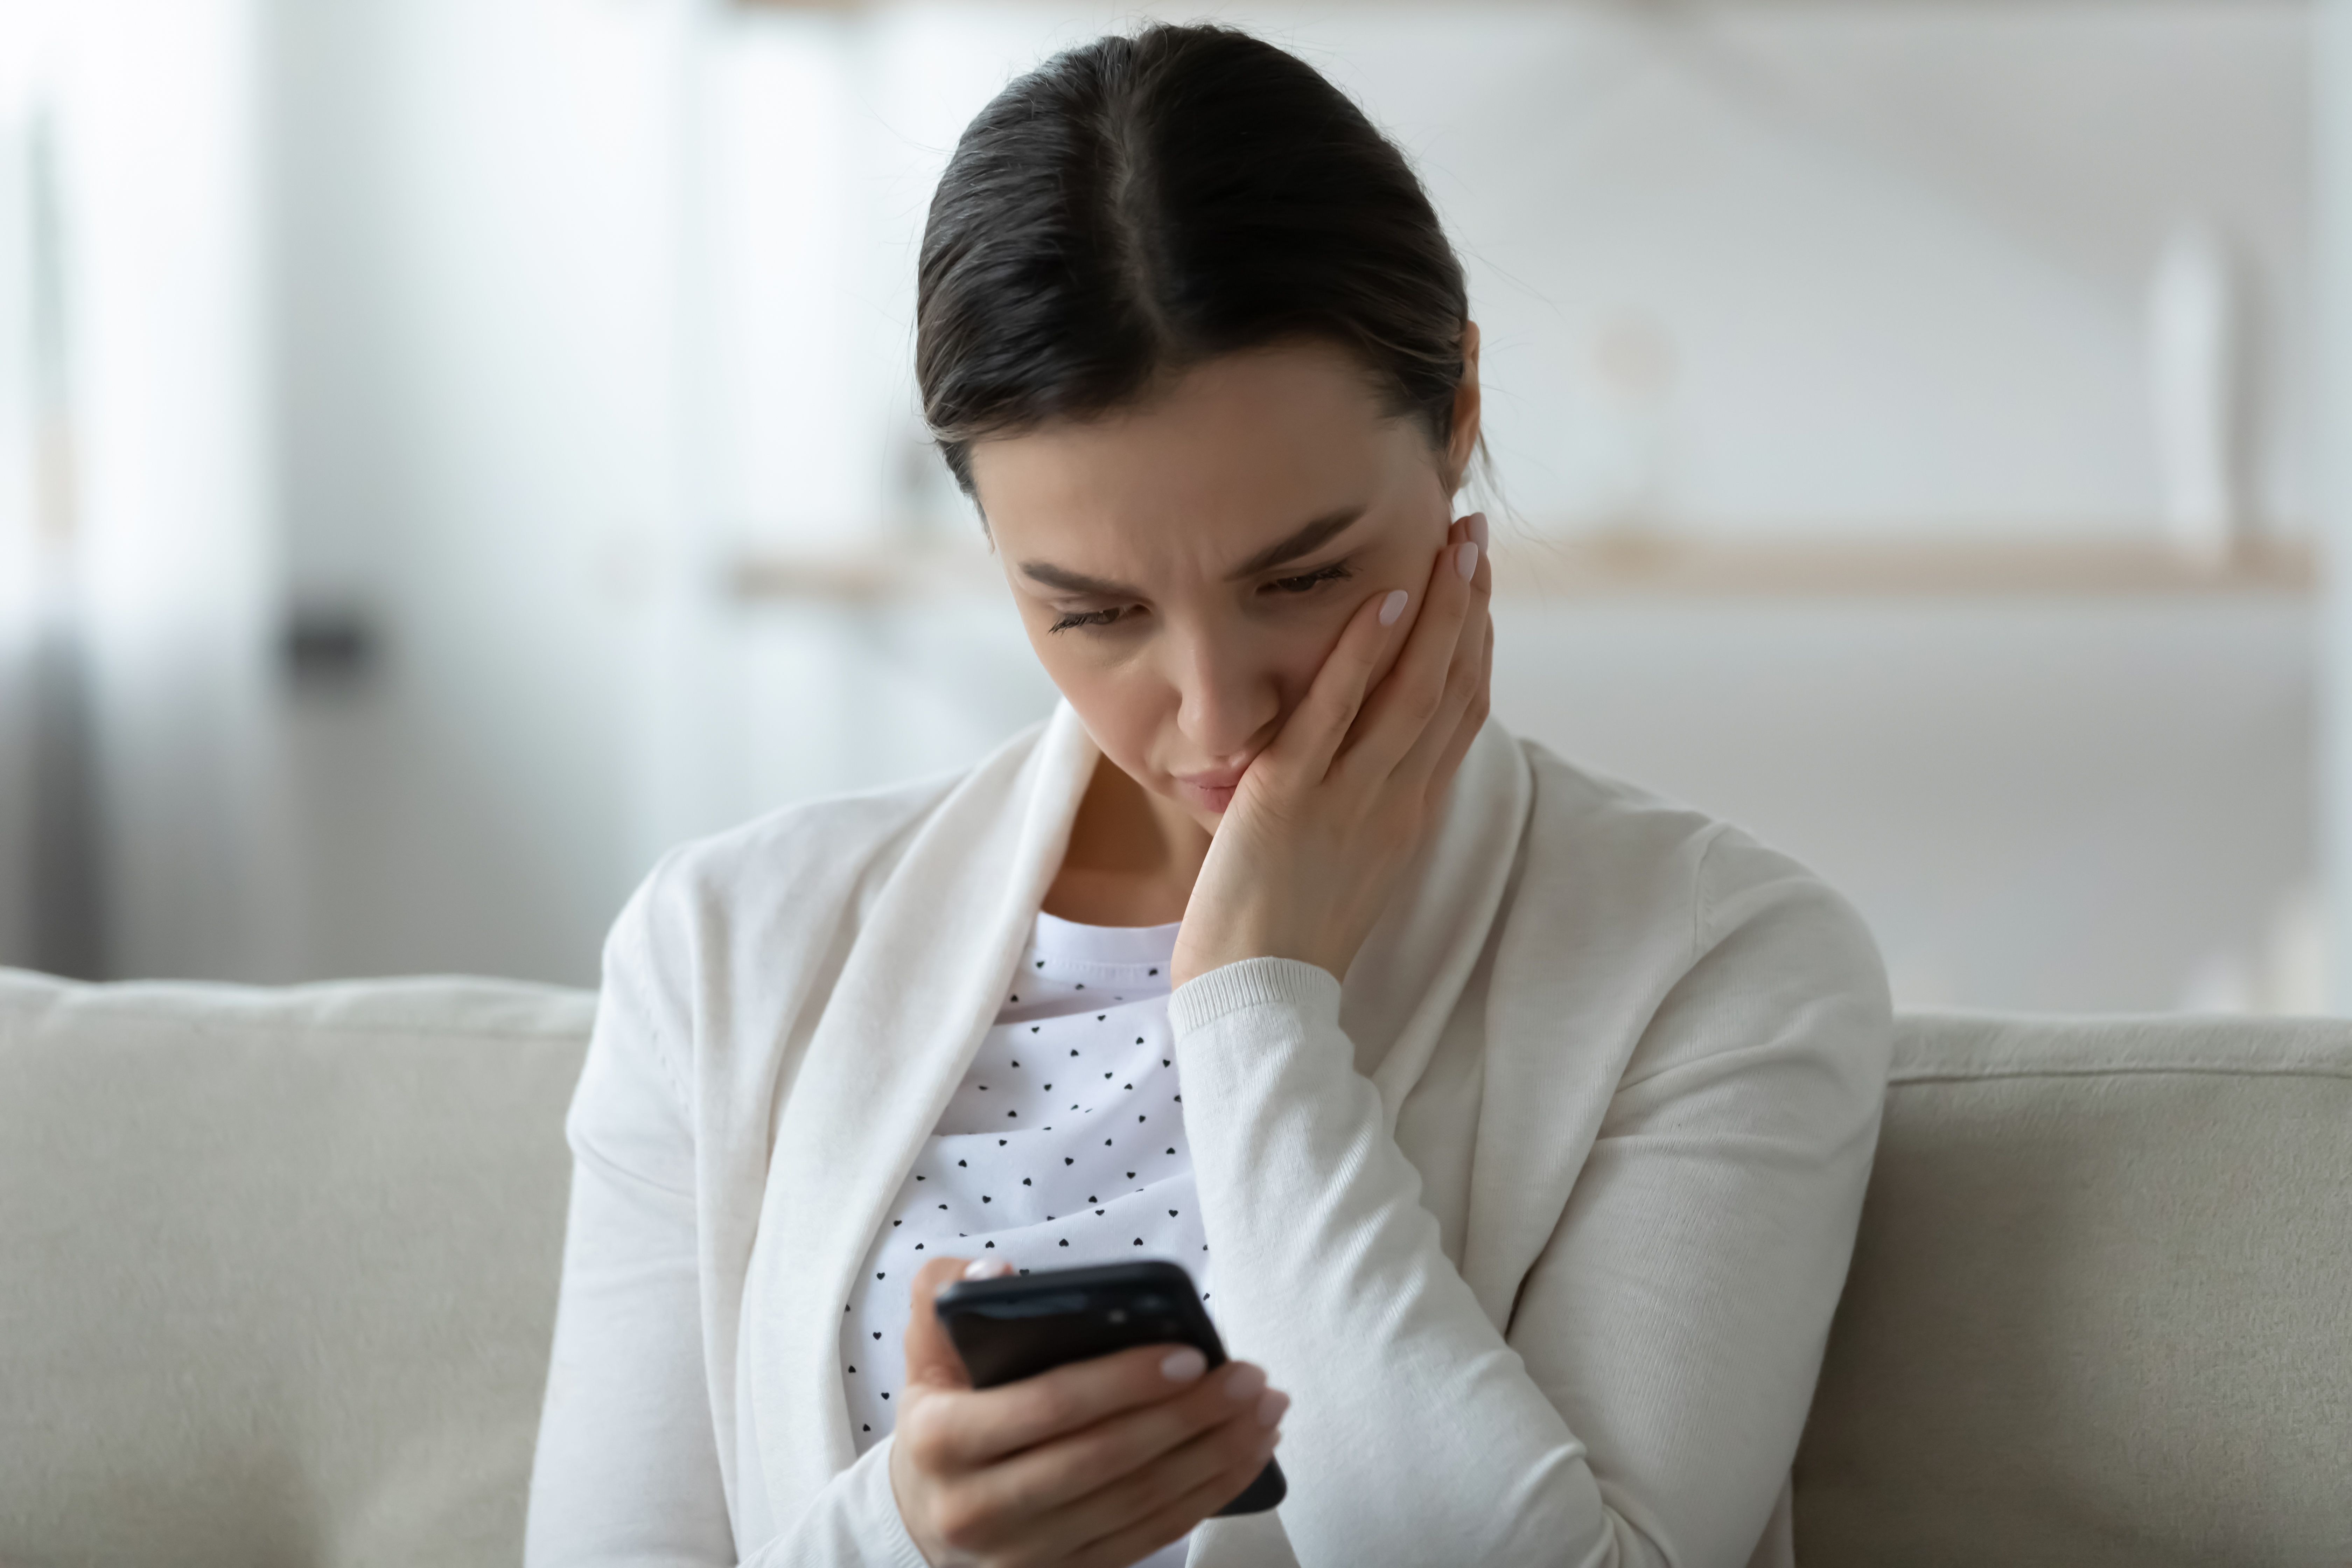 A distraught woman holding her smartphone | Source: Shutterstock